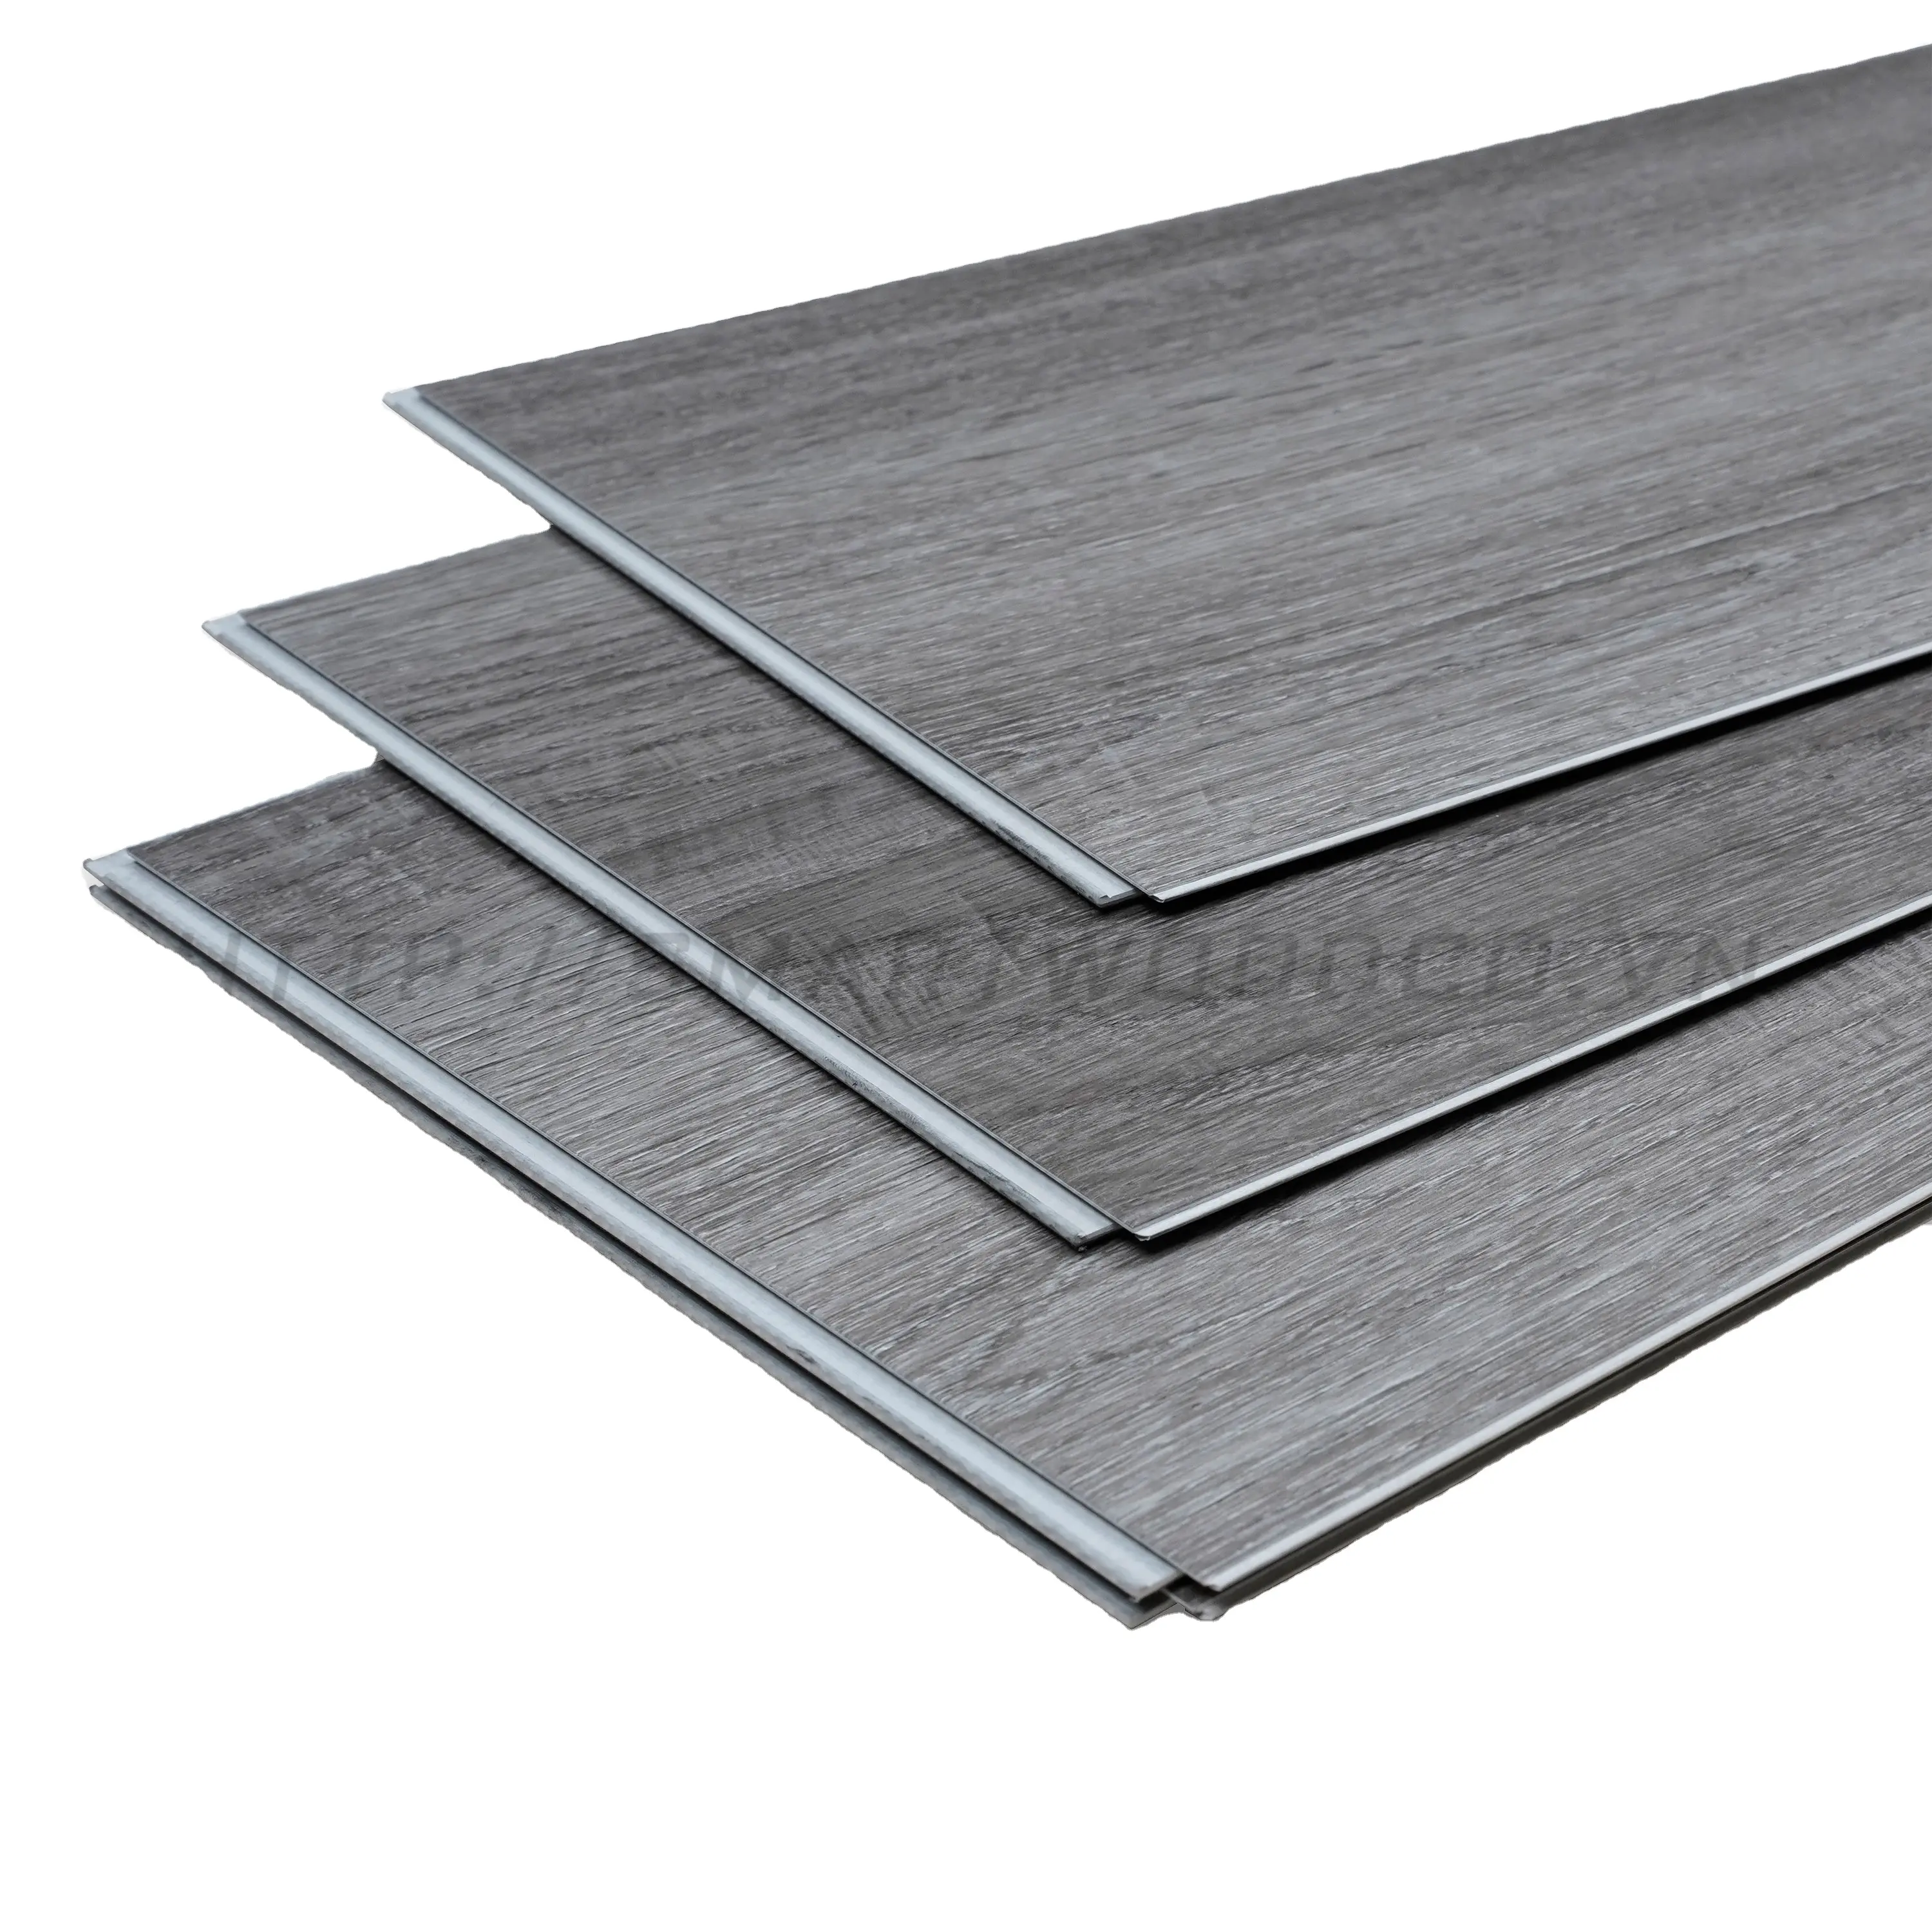 [Smartwood] Vinyl Flooring - SPC Flooring 3mm-6mm Core layer 0.7mm wear layer with Click-lock system // Glue down